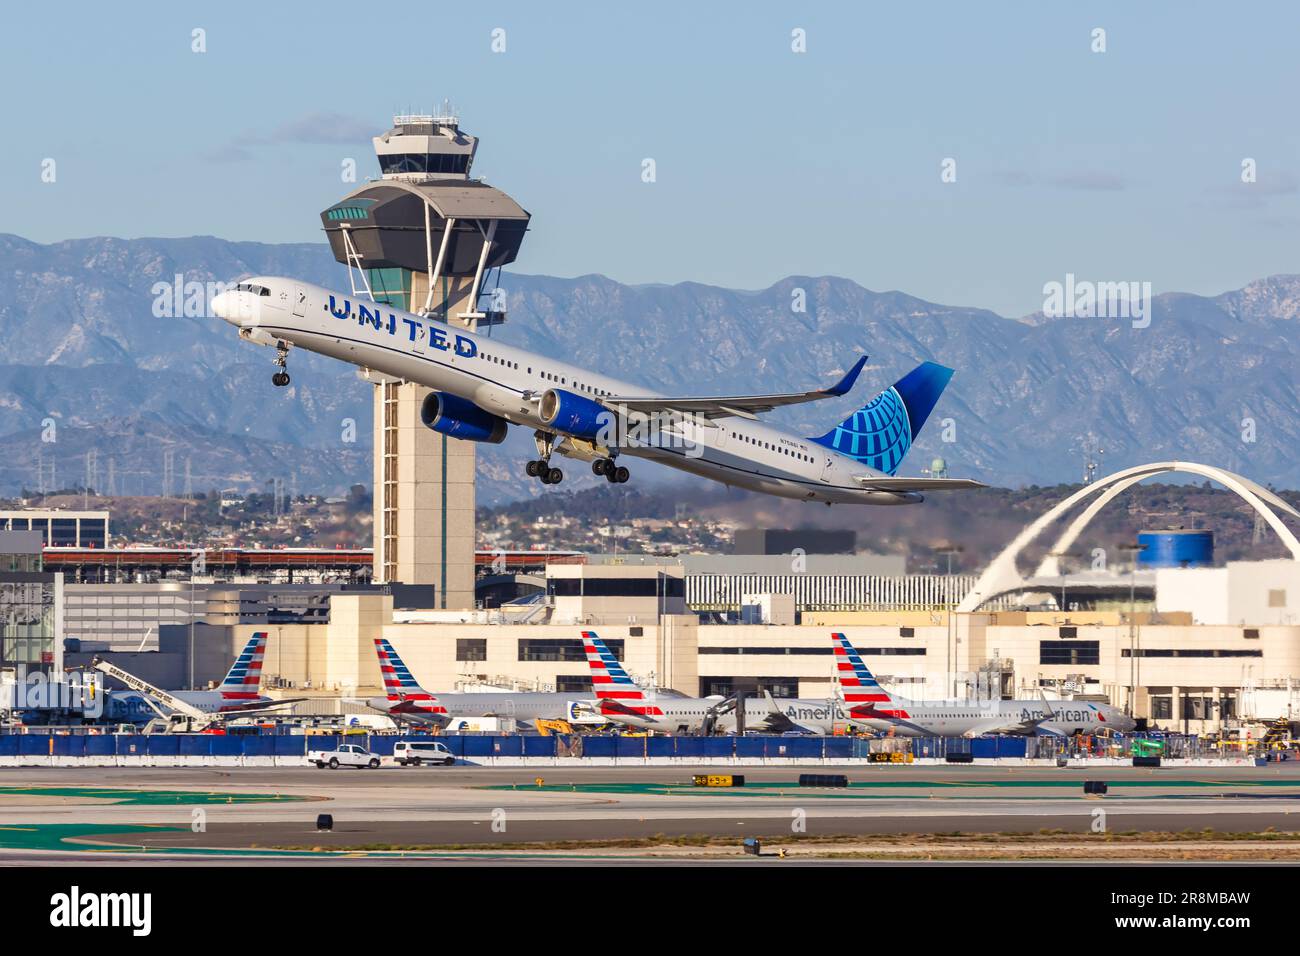 Los Angeles, United States - November 3, 2022: United Boeing 757-300 airplane at Los Angeles Airport (LAX) in the United States. Stock Photo